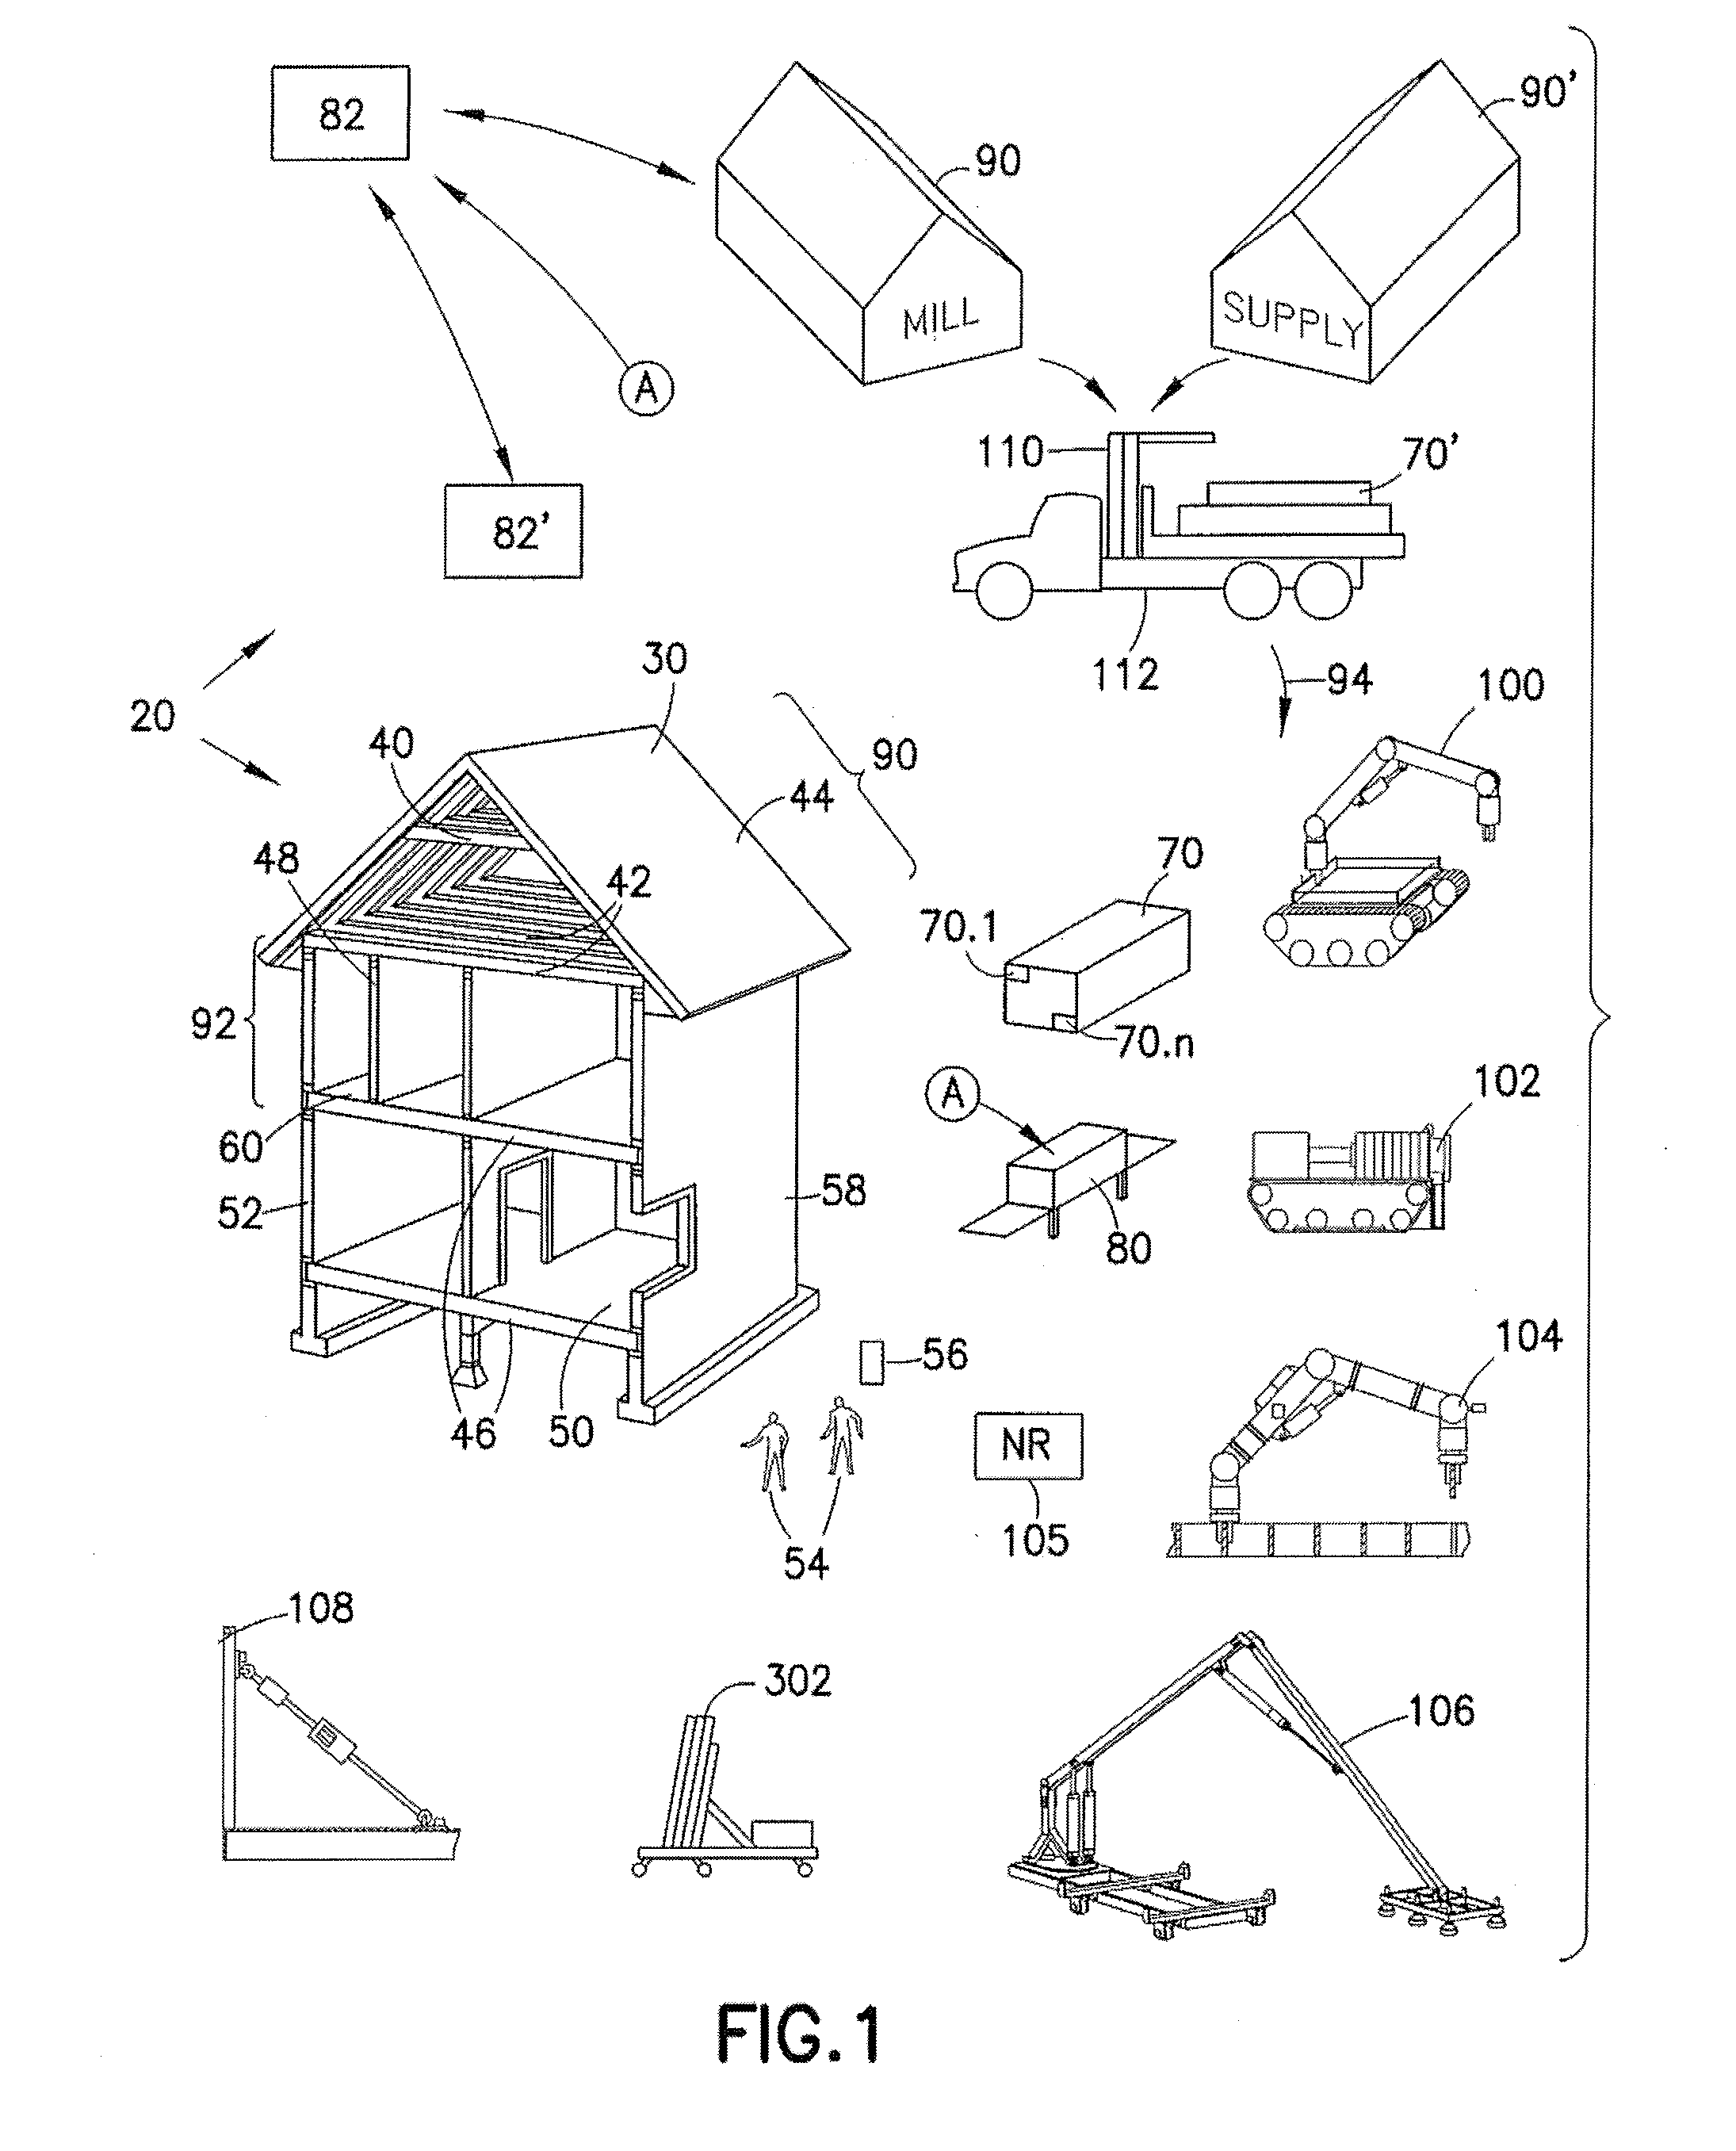 Construction material handling method and apparatus